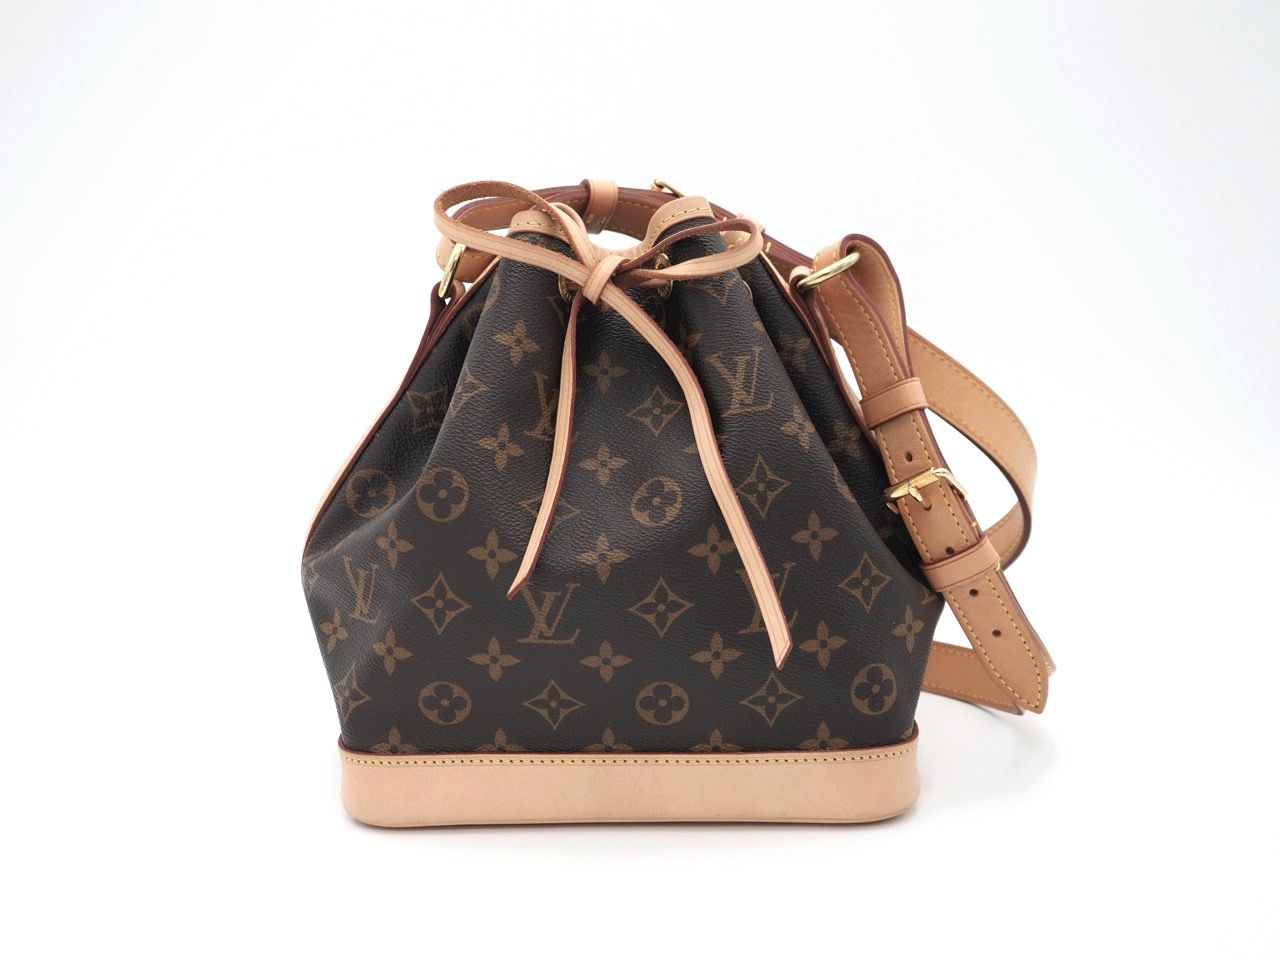 Louis Vuitton Noe, Noe NM and Noe BB review and comparison 